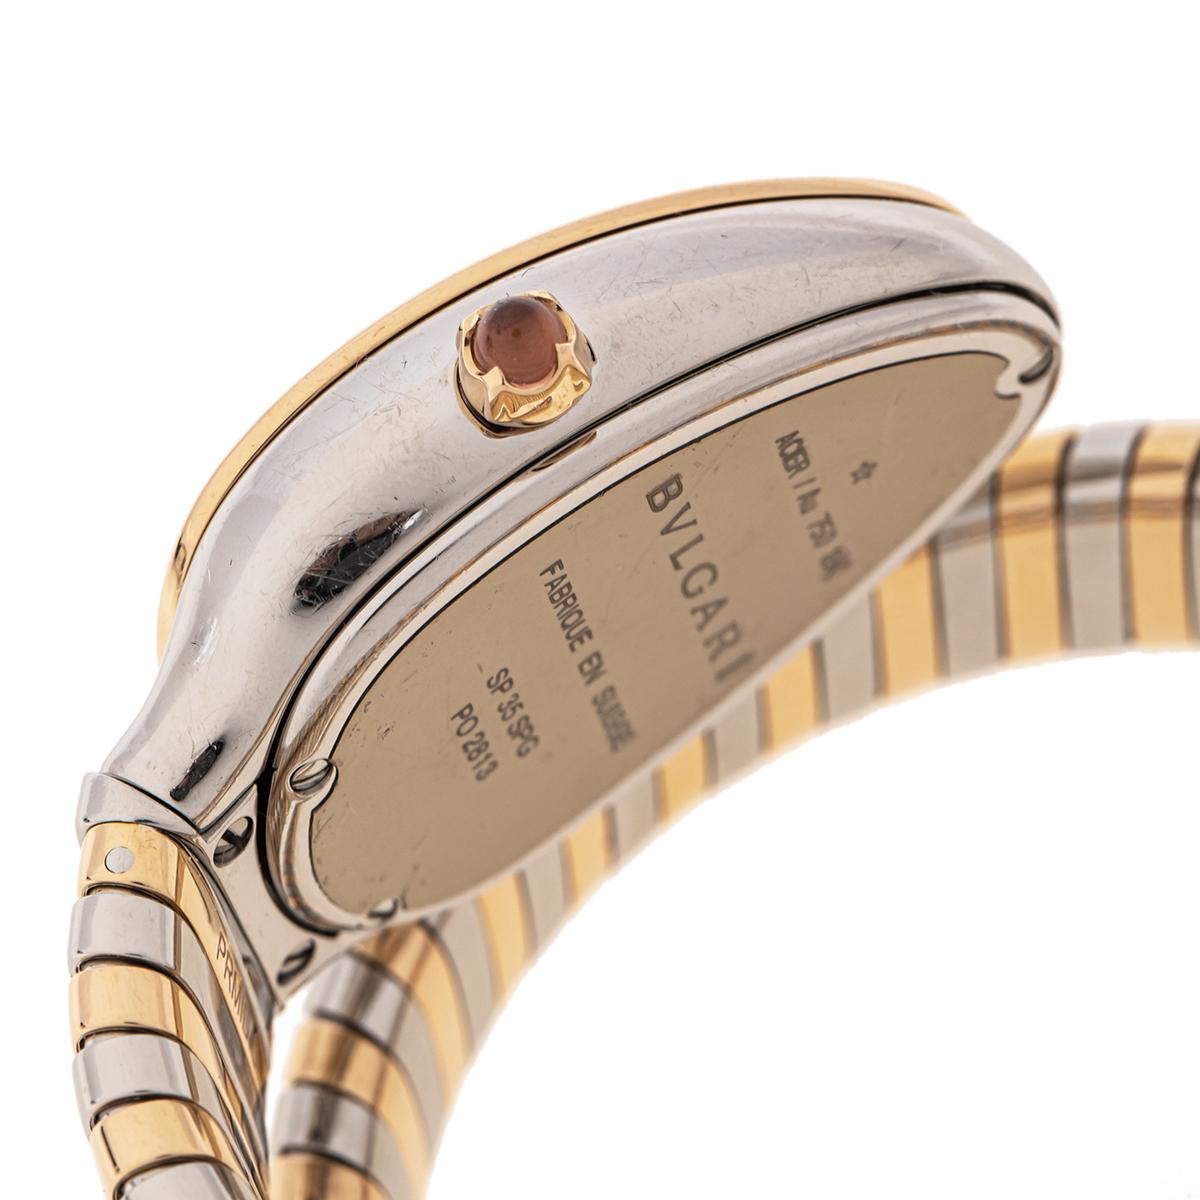 Exuding glamour and unique style, the Serpenti Tubogas quartz watch is an icon of the Bvlgari House. The 18K rose gold and stainless steel construction, spiraled twice, has its ends designed as the head and tail of a serpent. Wearable and chic, the